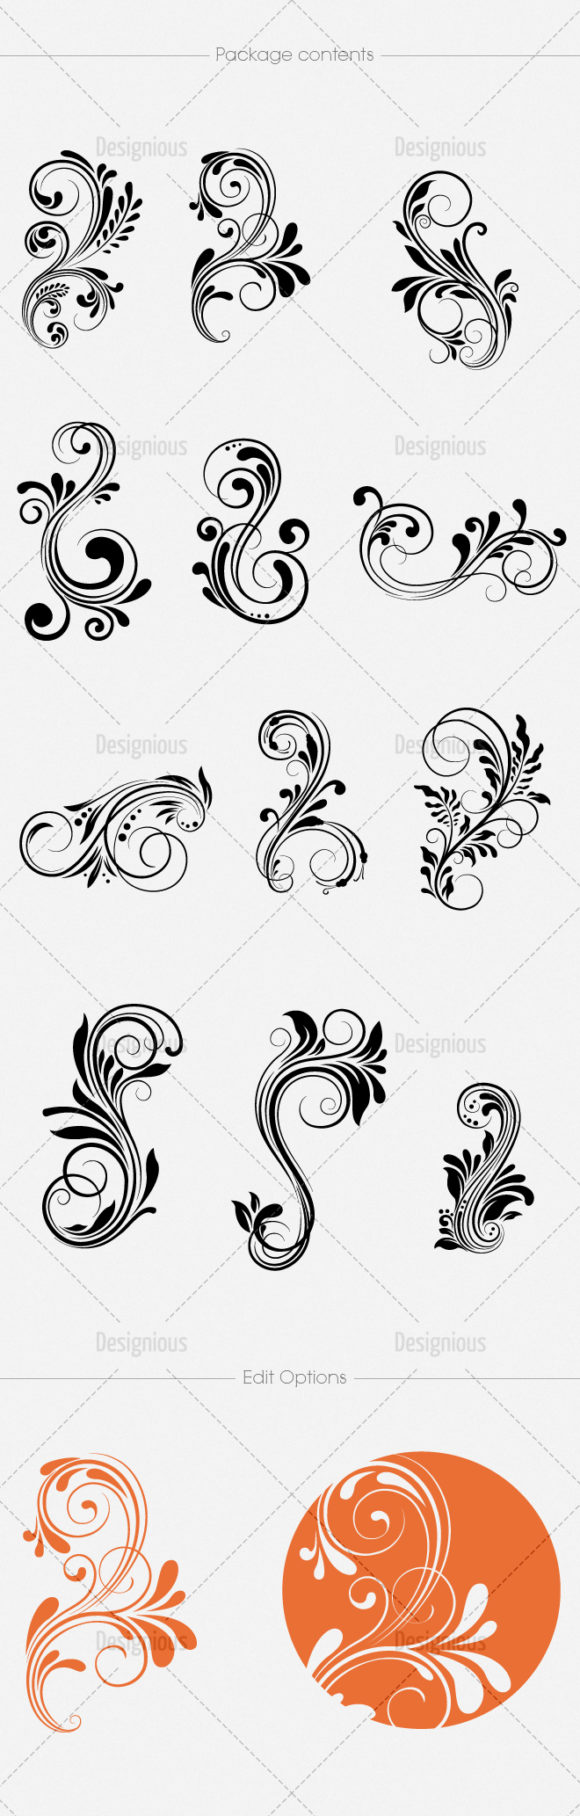 Floral Vector Pack 115 2